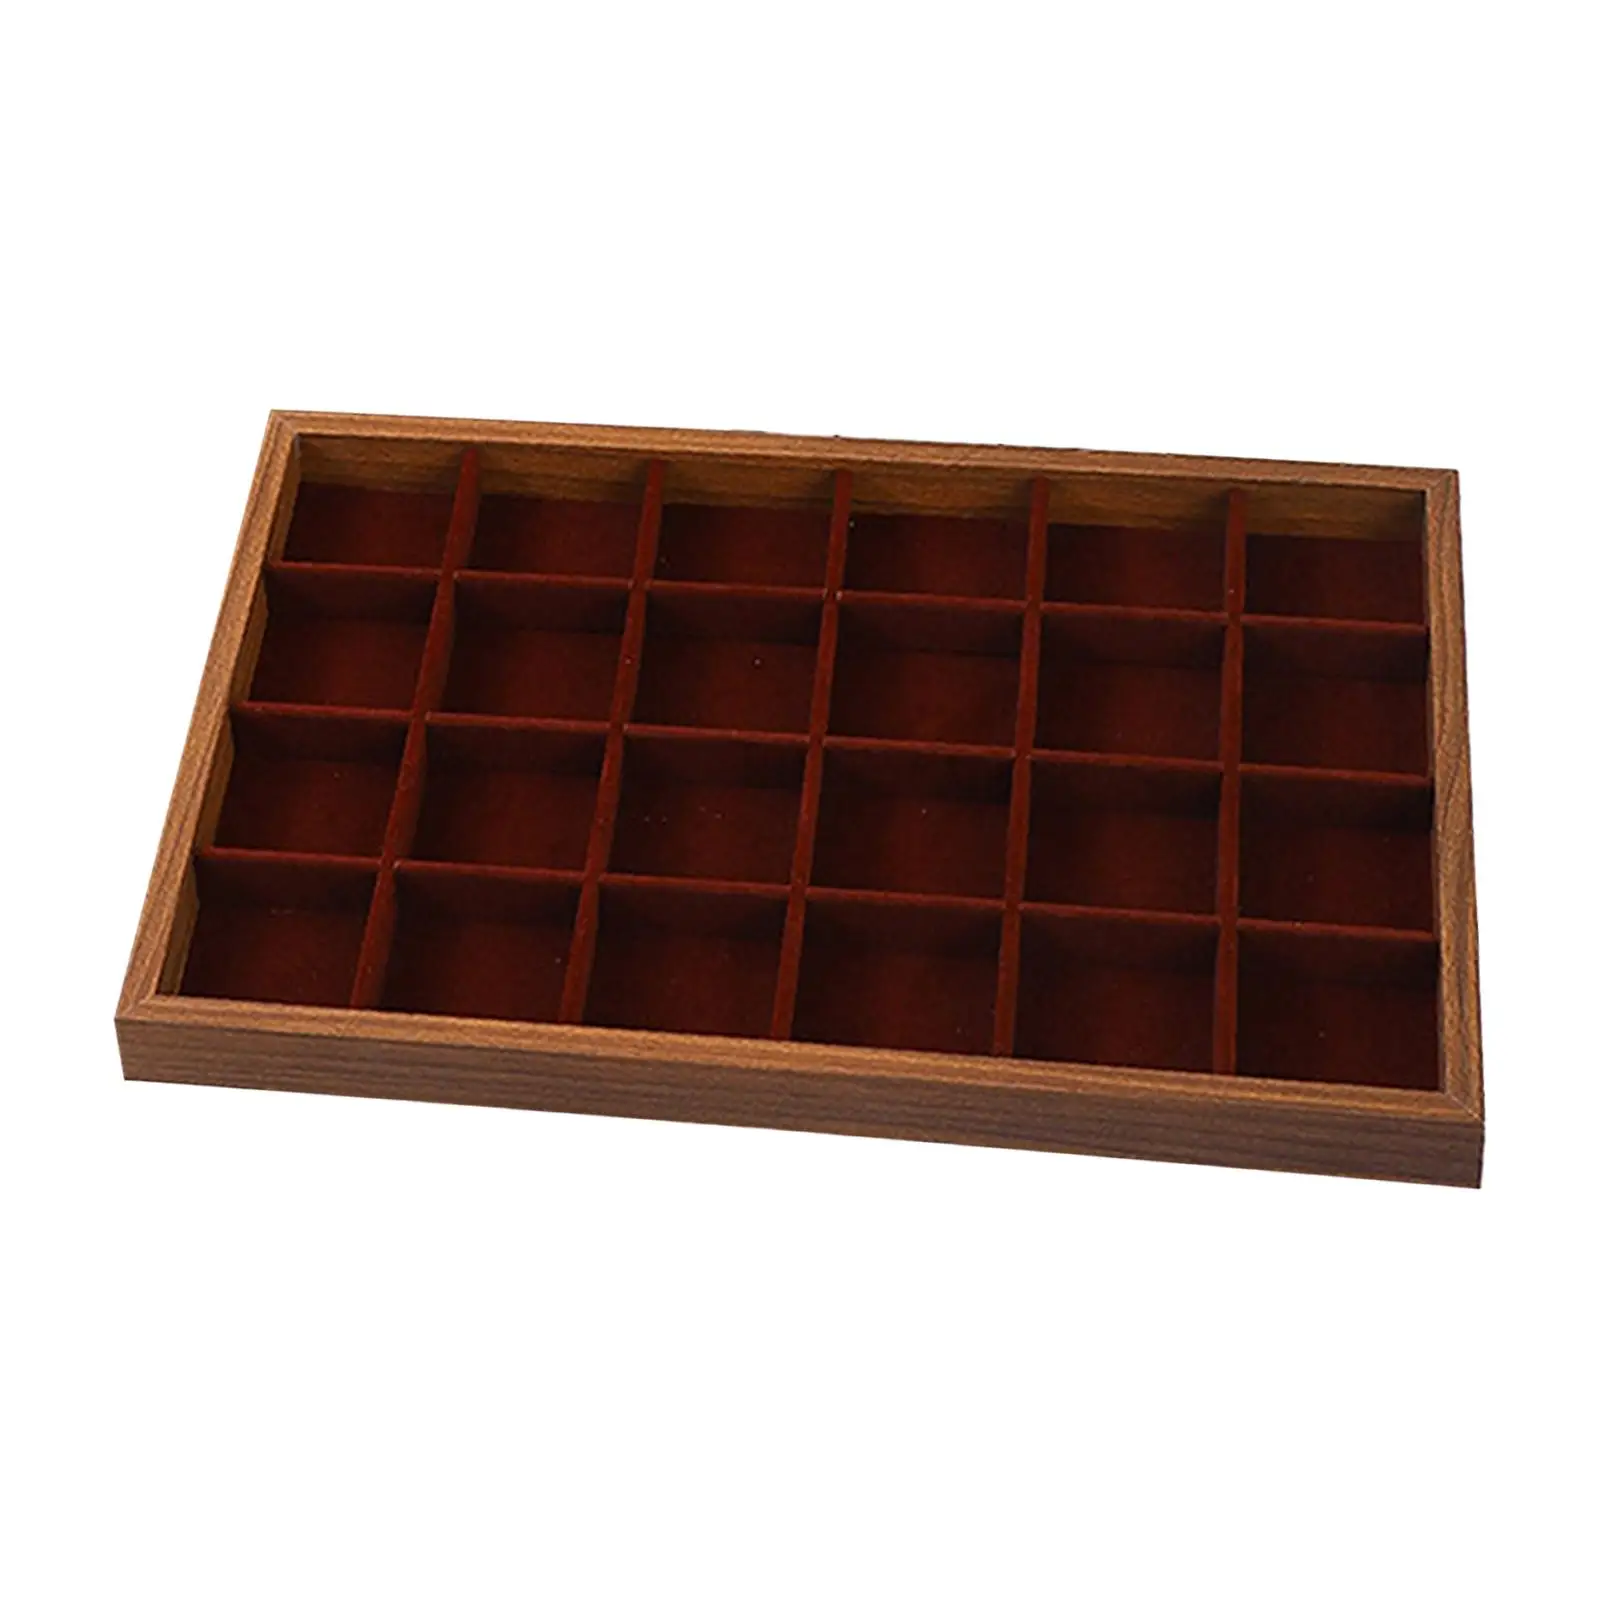 

24 Grid Jewelry Organizer Tray Wood Accessories Jewelry Display Showcase Tray for Vanity Countertop Home Bedroom Drawer Bracelet